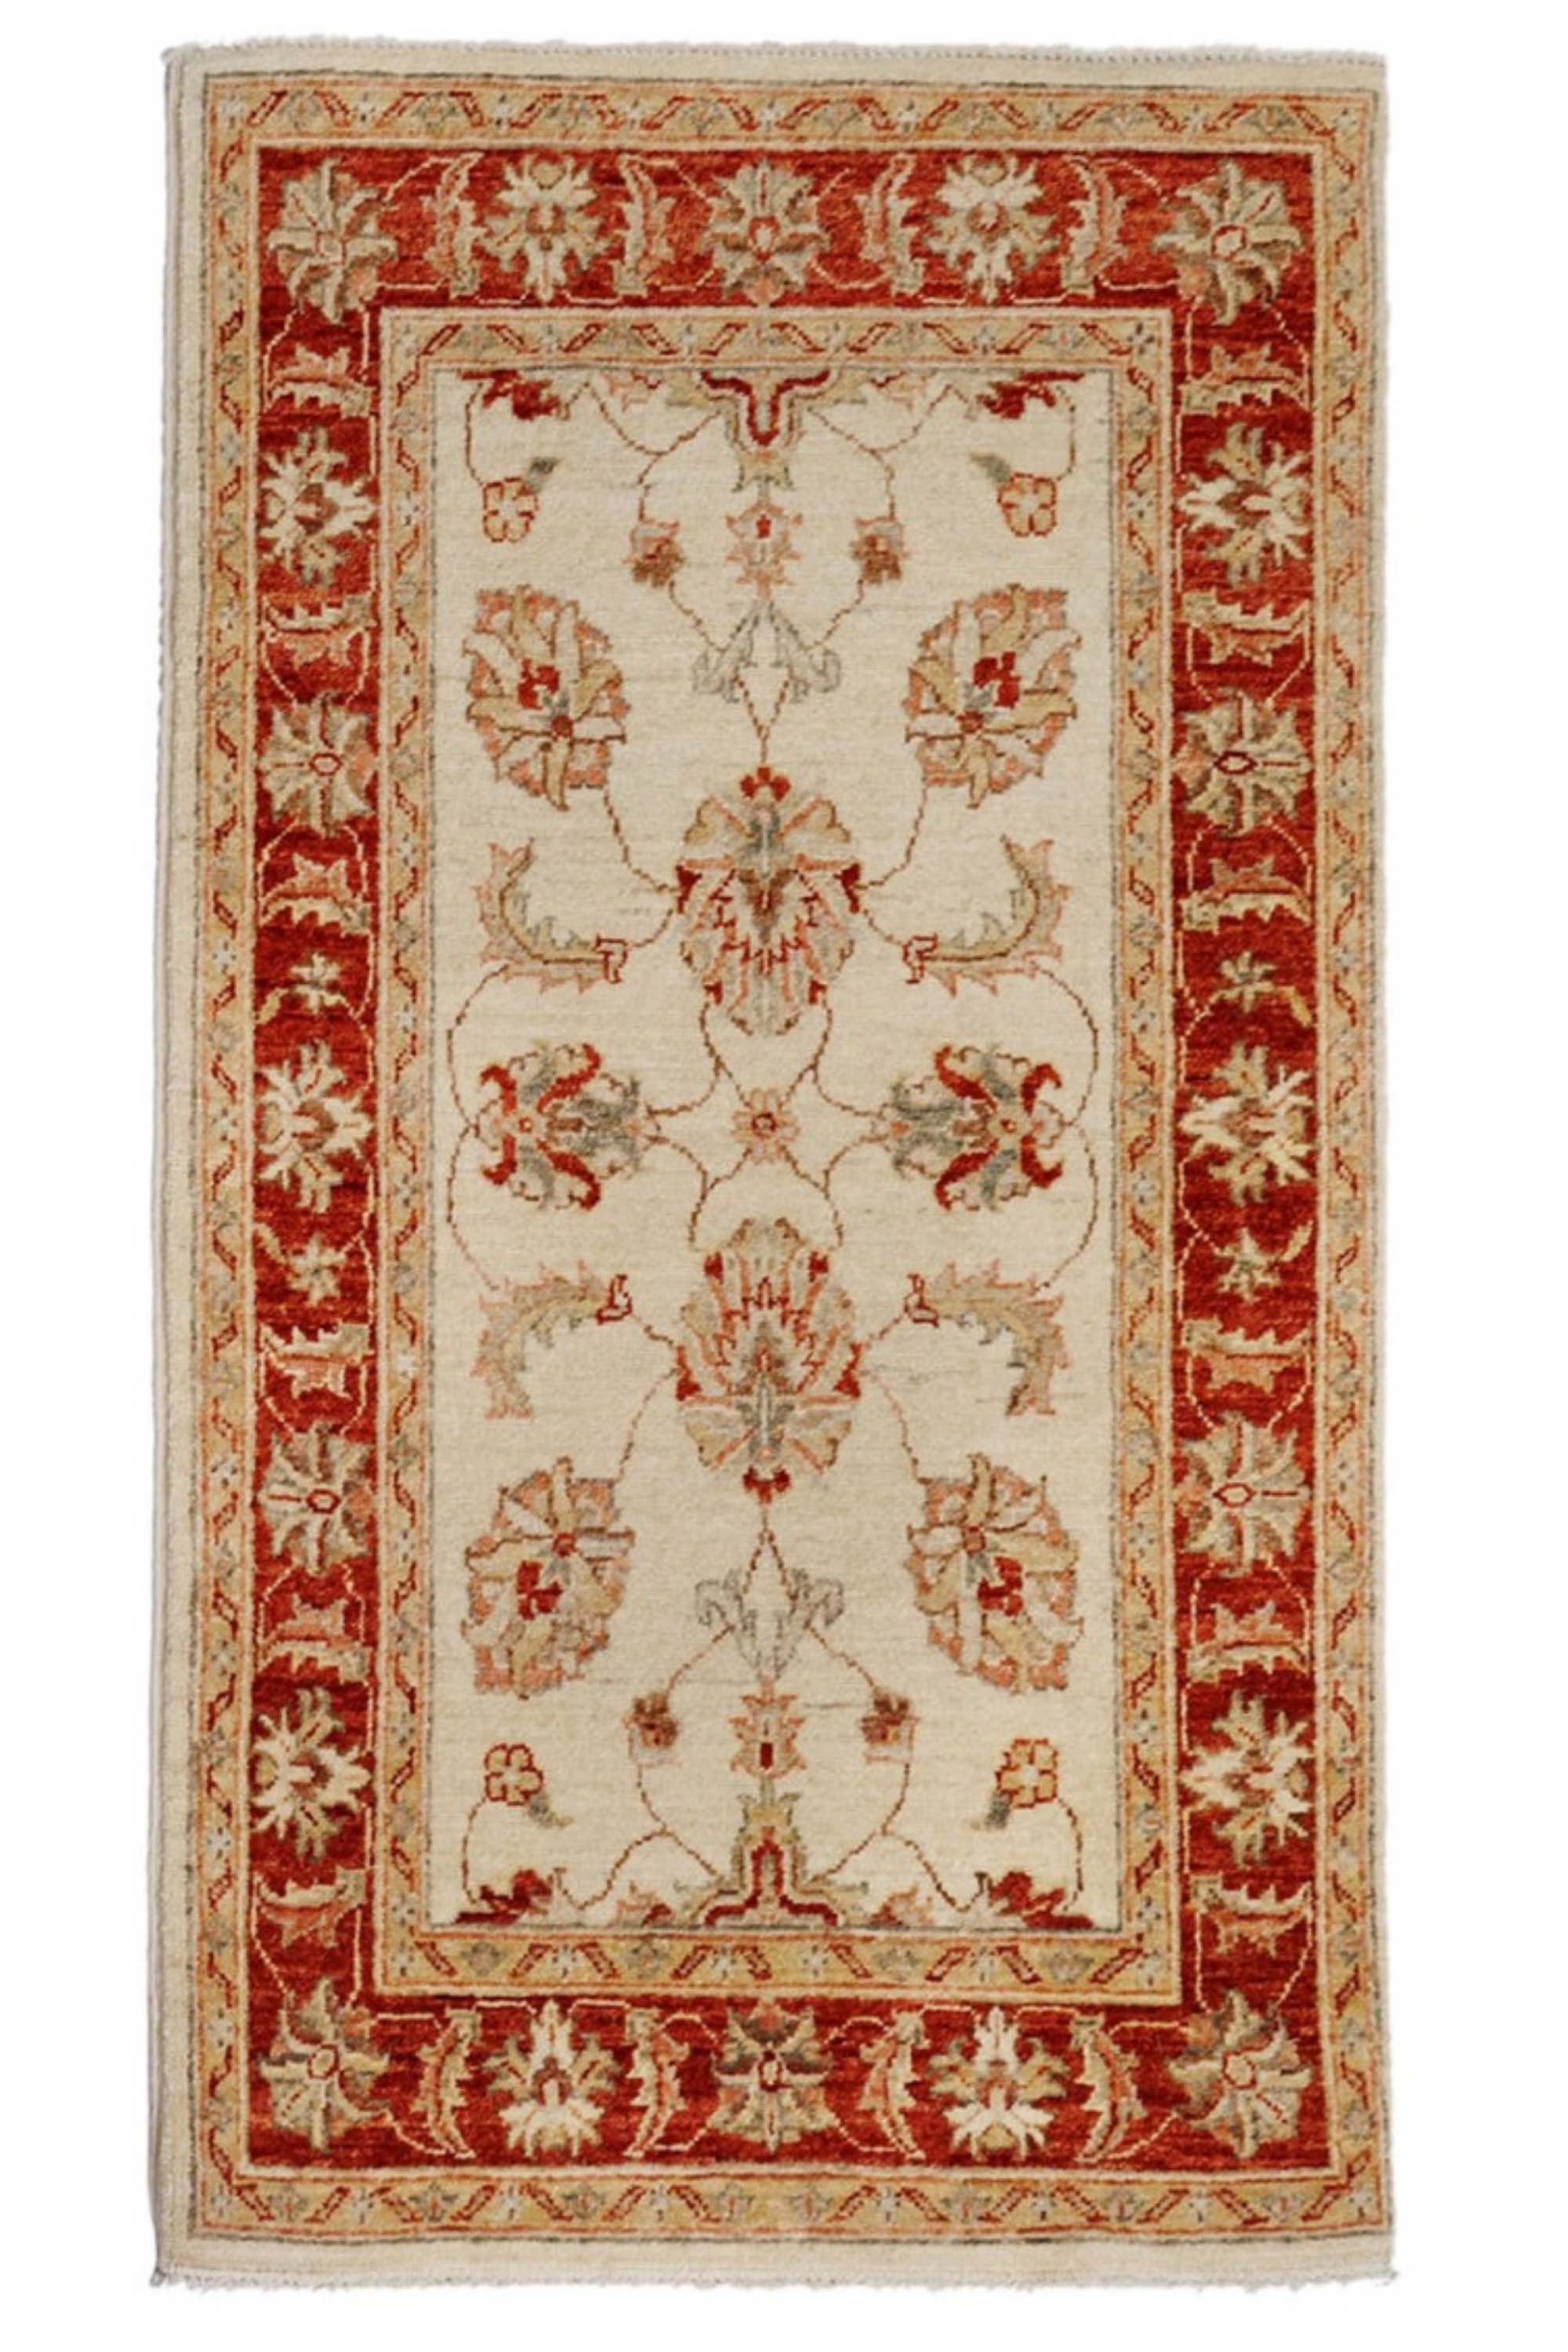 authentic oriental rug with delicate floral pattern in red and beige